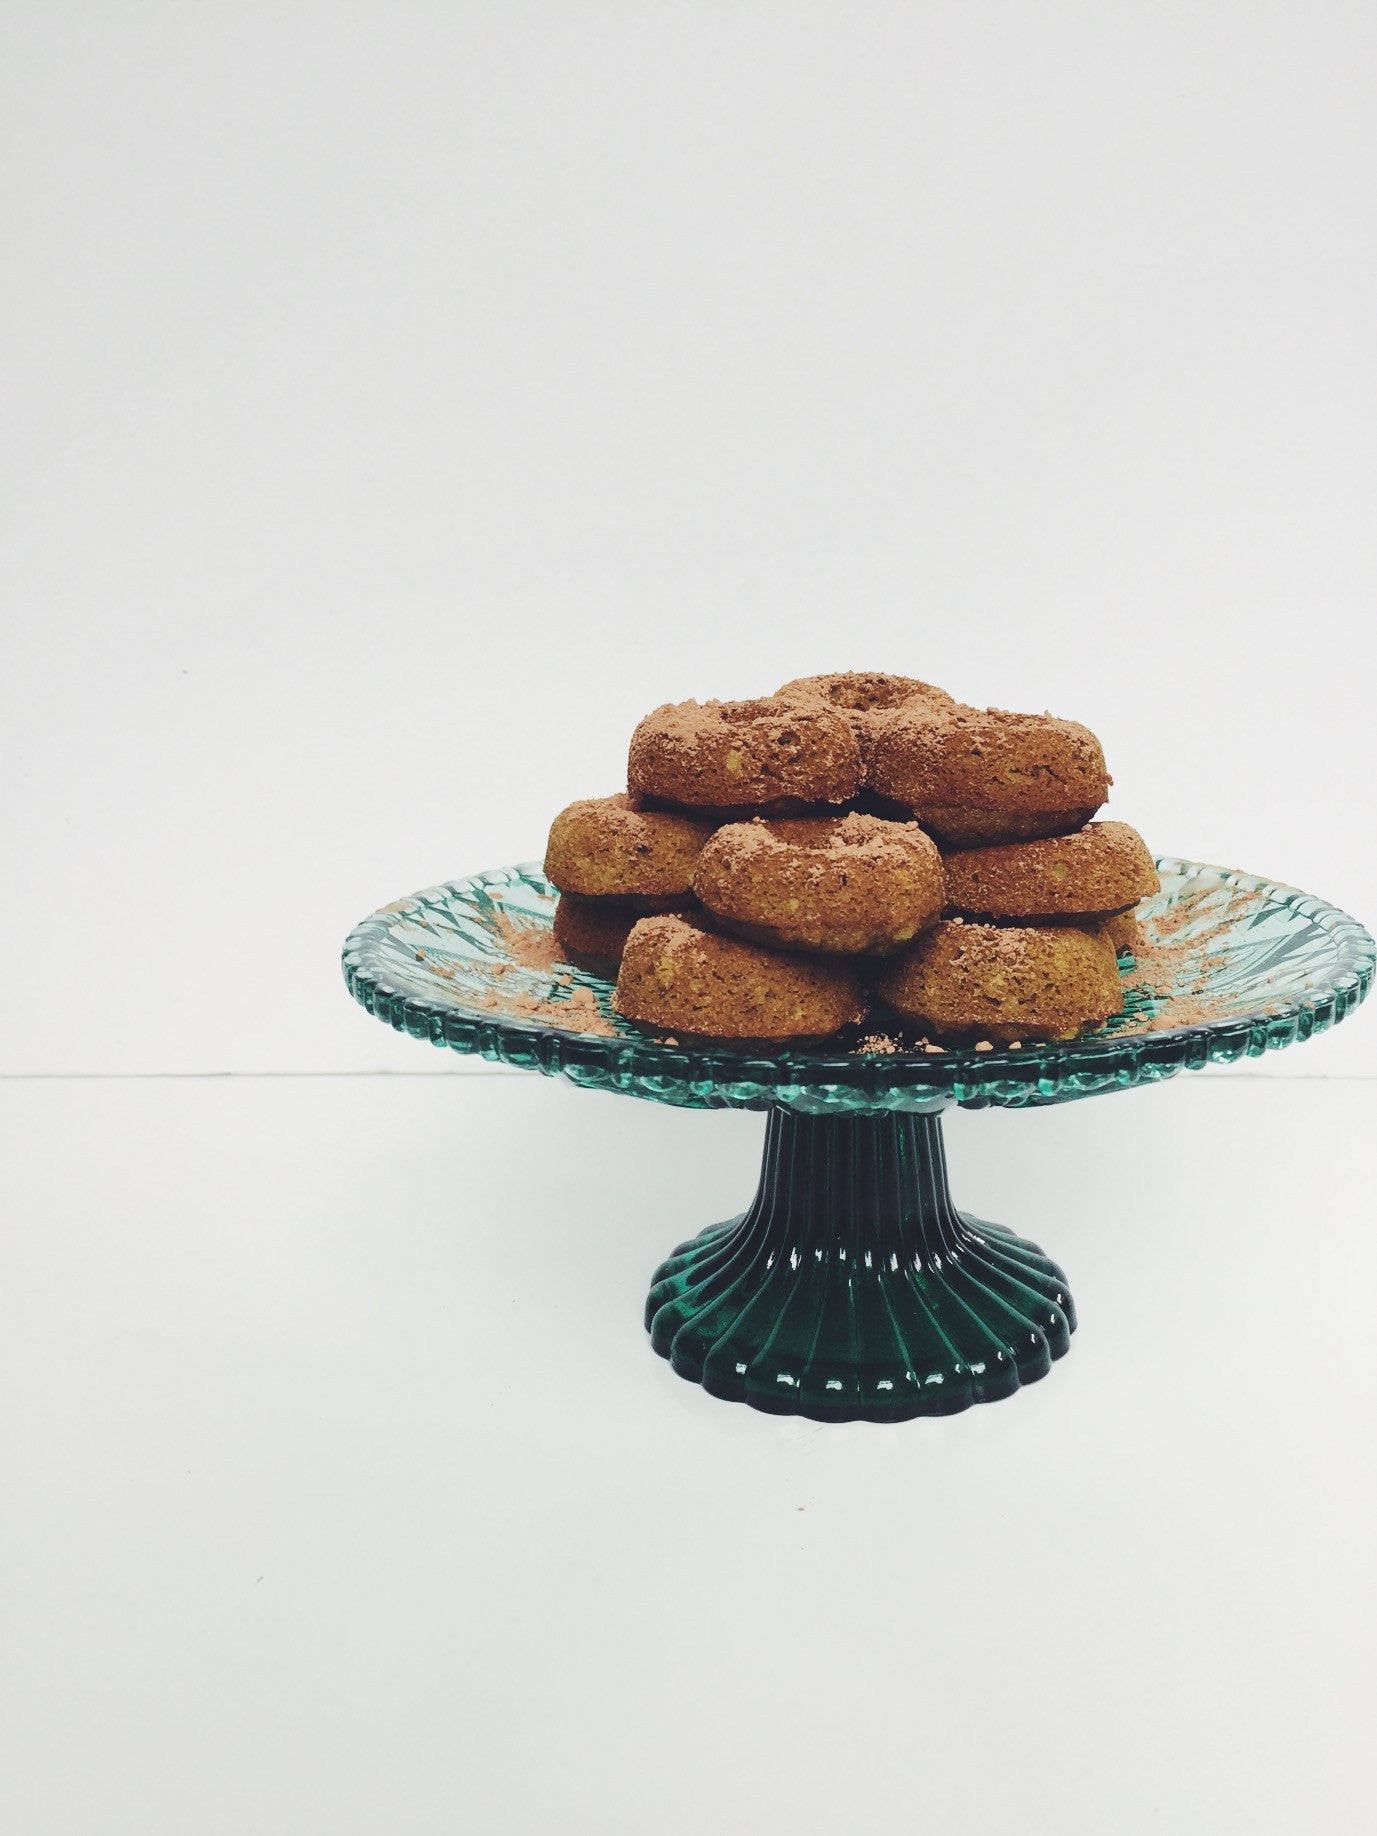 Gluten-Free, Dairy-Free Cocoa Dusted Matchaful Donuts